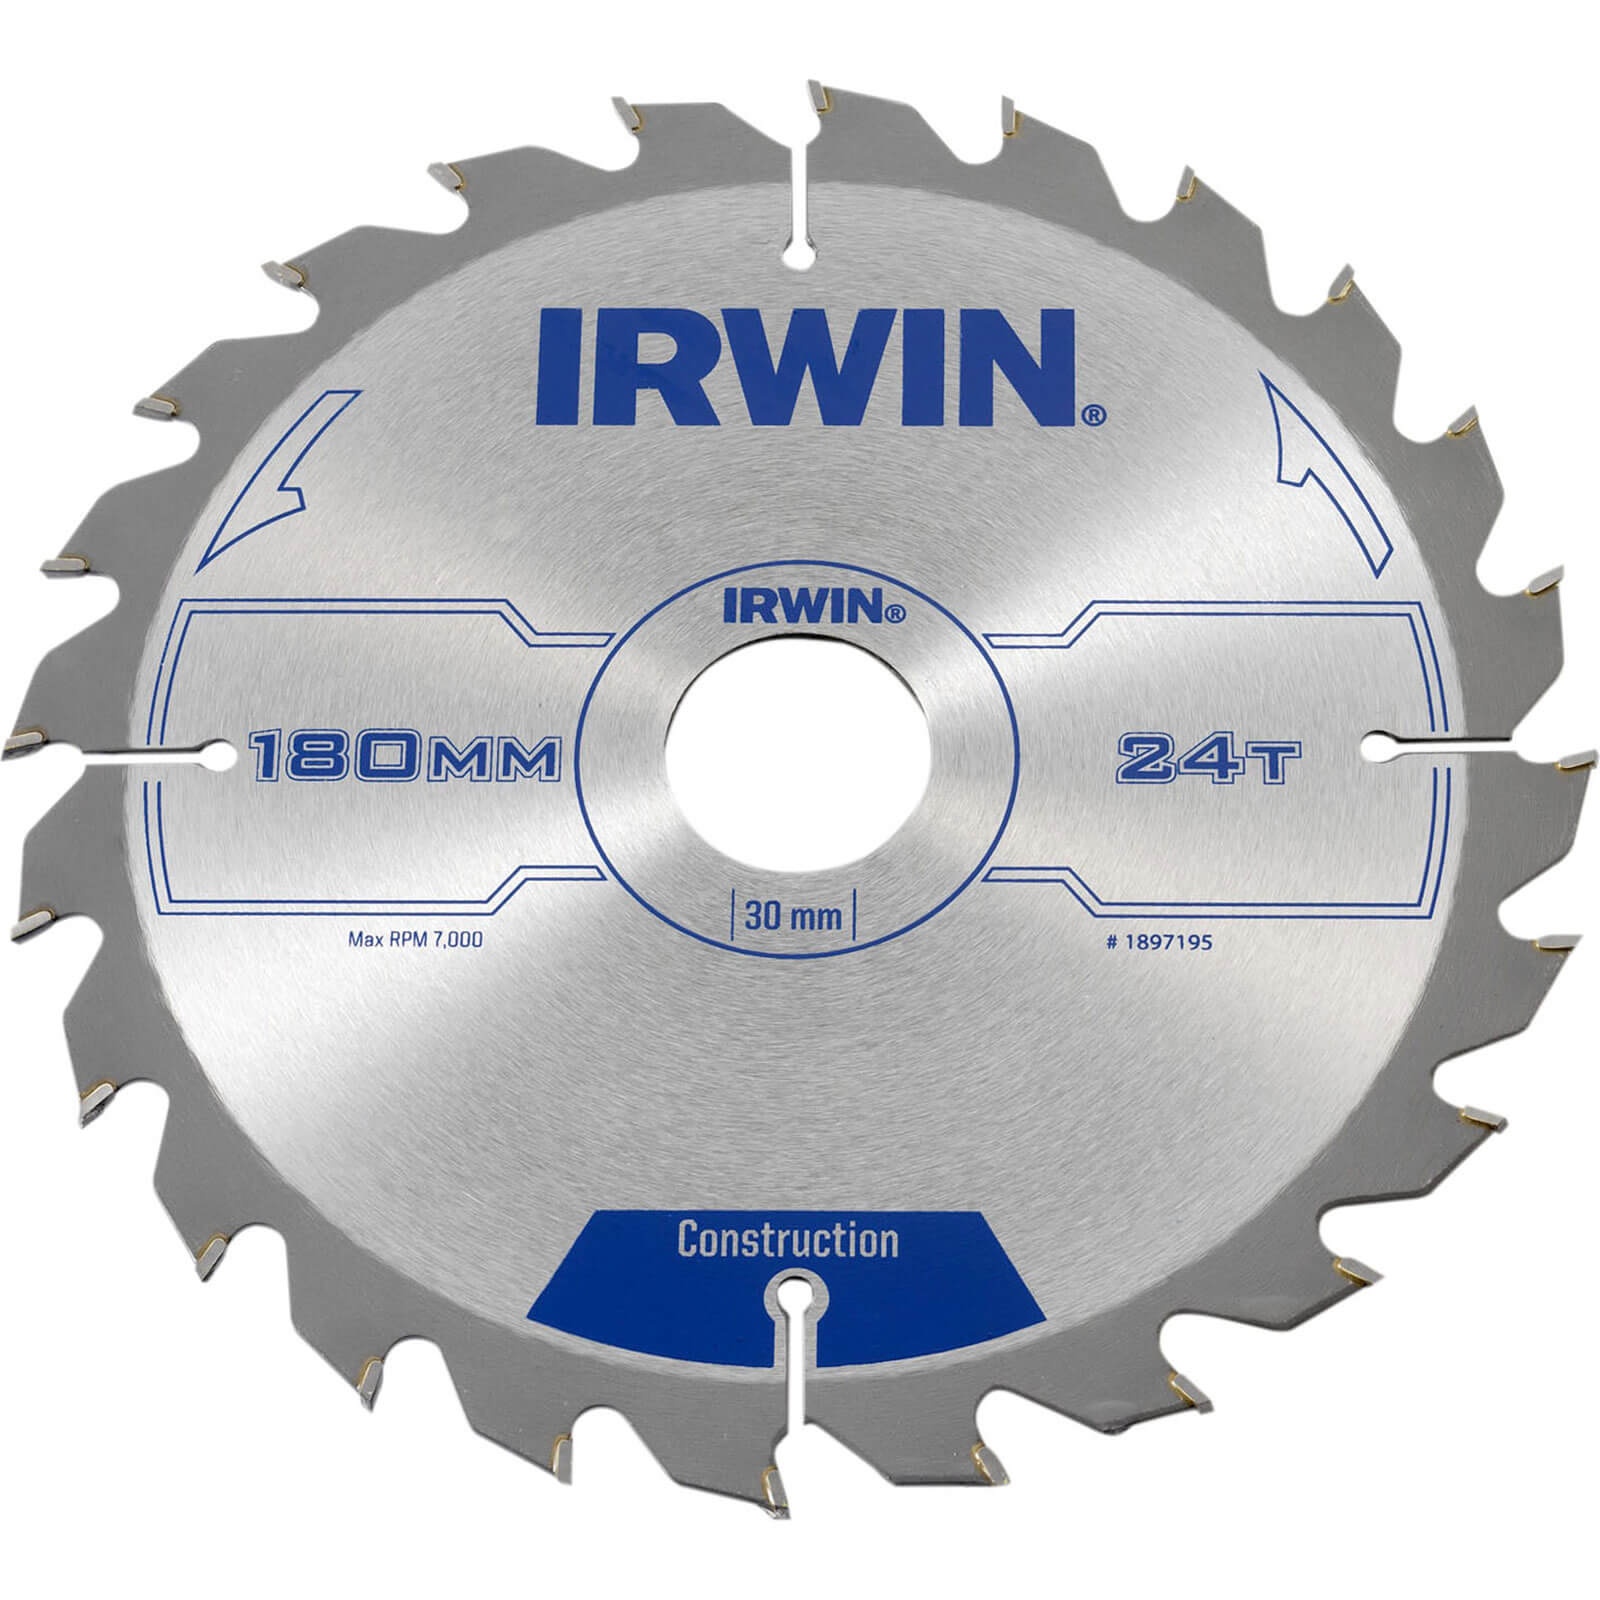 Image of Irwin ATB Construction Circular Saw Blade 180mm 24T 30mm